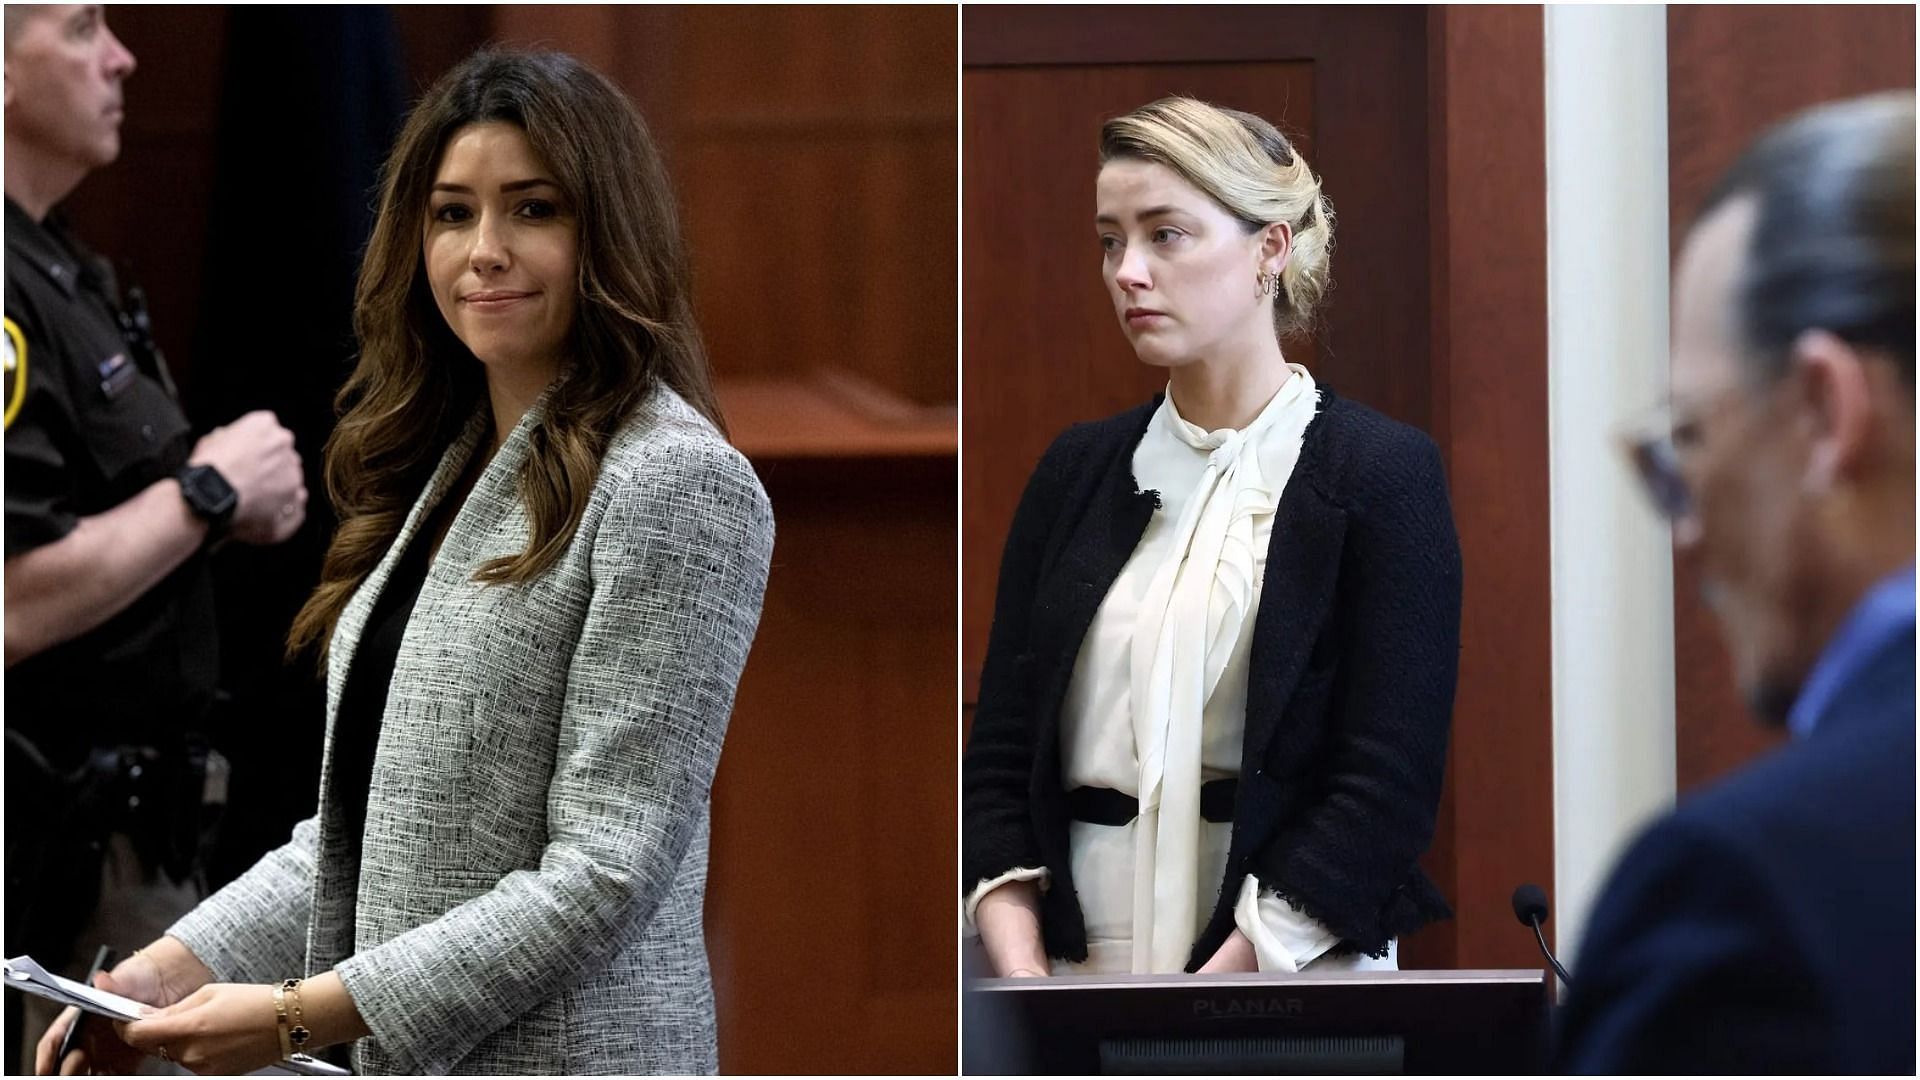 Camille Vasquez and Amber Heard in the court (Image via Brendan Smialowski/Pool/AFP/Getty Images, and Jim Lo Scalzo/AFP/Getty Images)